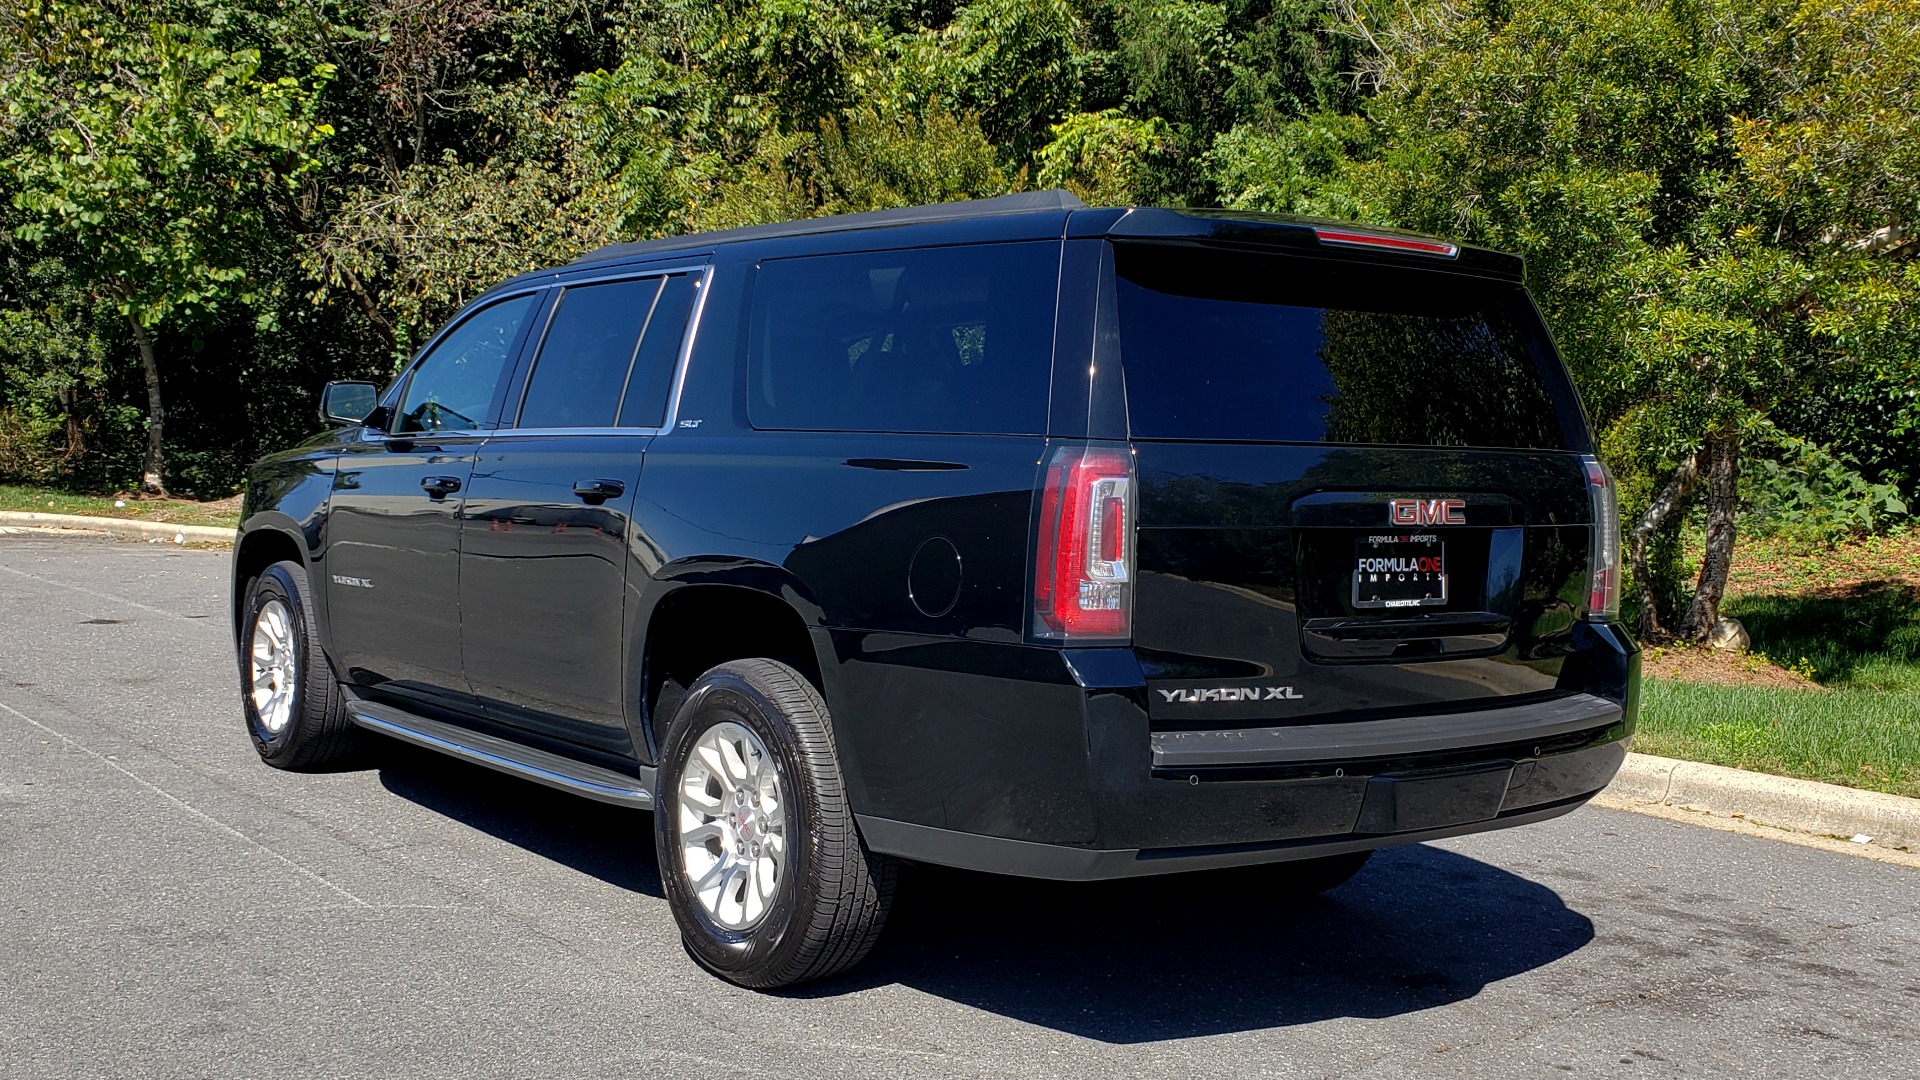 Used 2016 GMC YUKON XL SLT / NAV / BOSE / 3-ROWS - SEATS 8 / REARVIEW for sale Sold at Formula Imports in Charlotte NC 28227 6